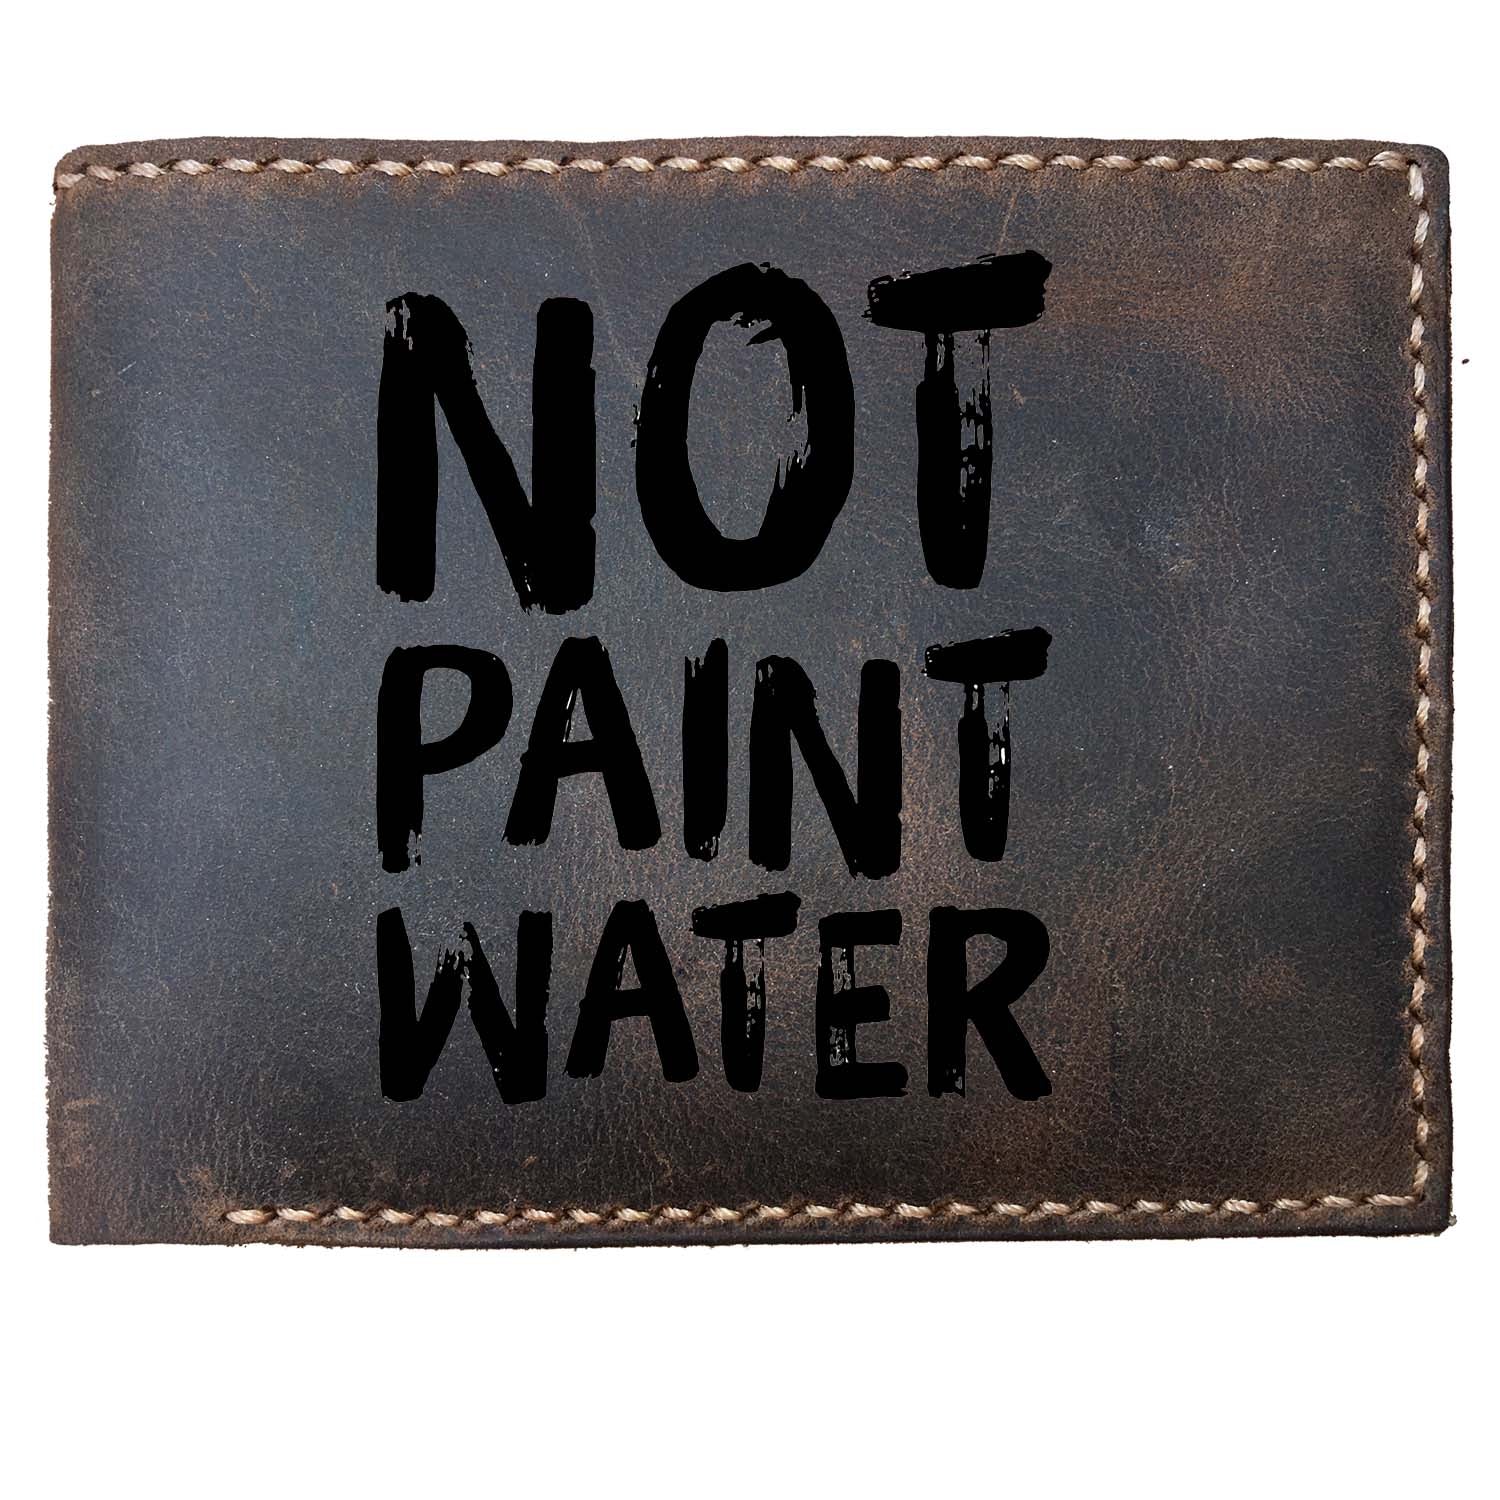 Funny Skitongifts Custom Laser Engraved Bifold Leather Wallet For Men, Not Paint Water